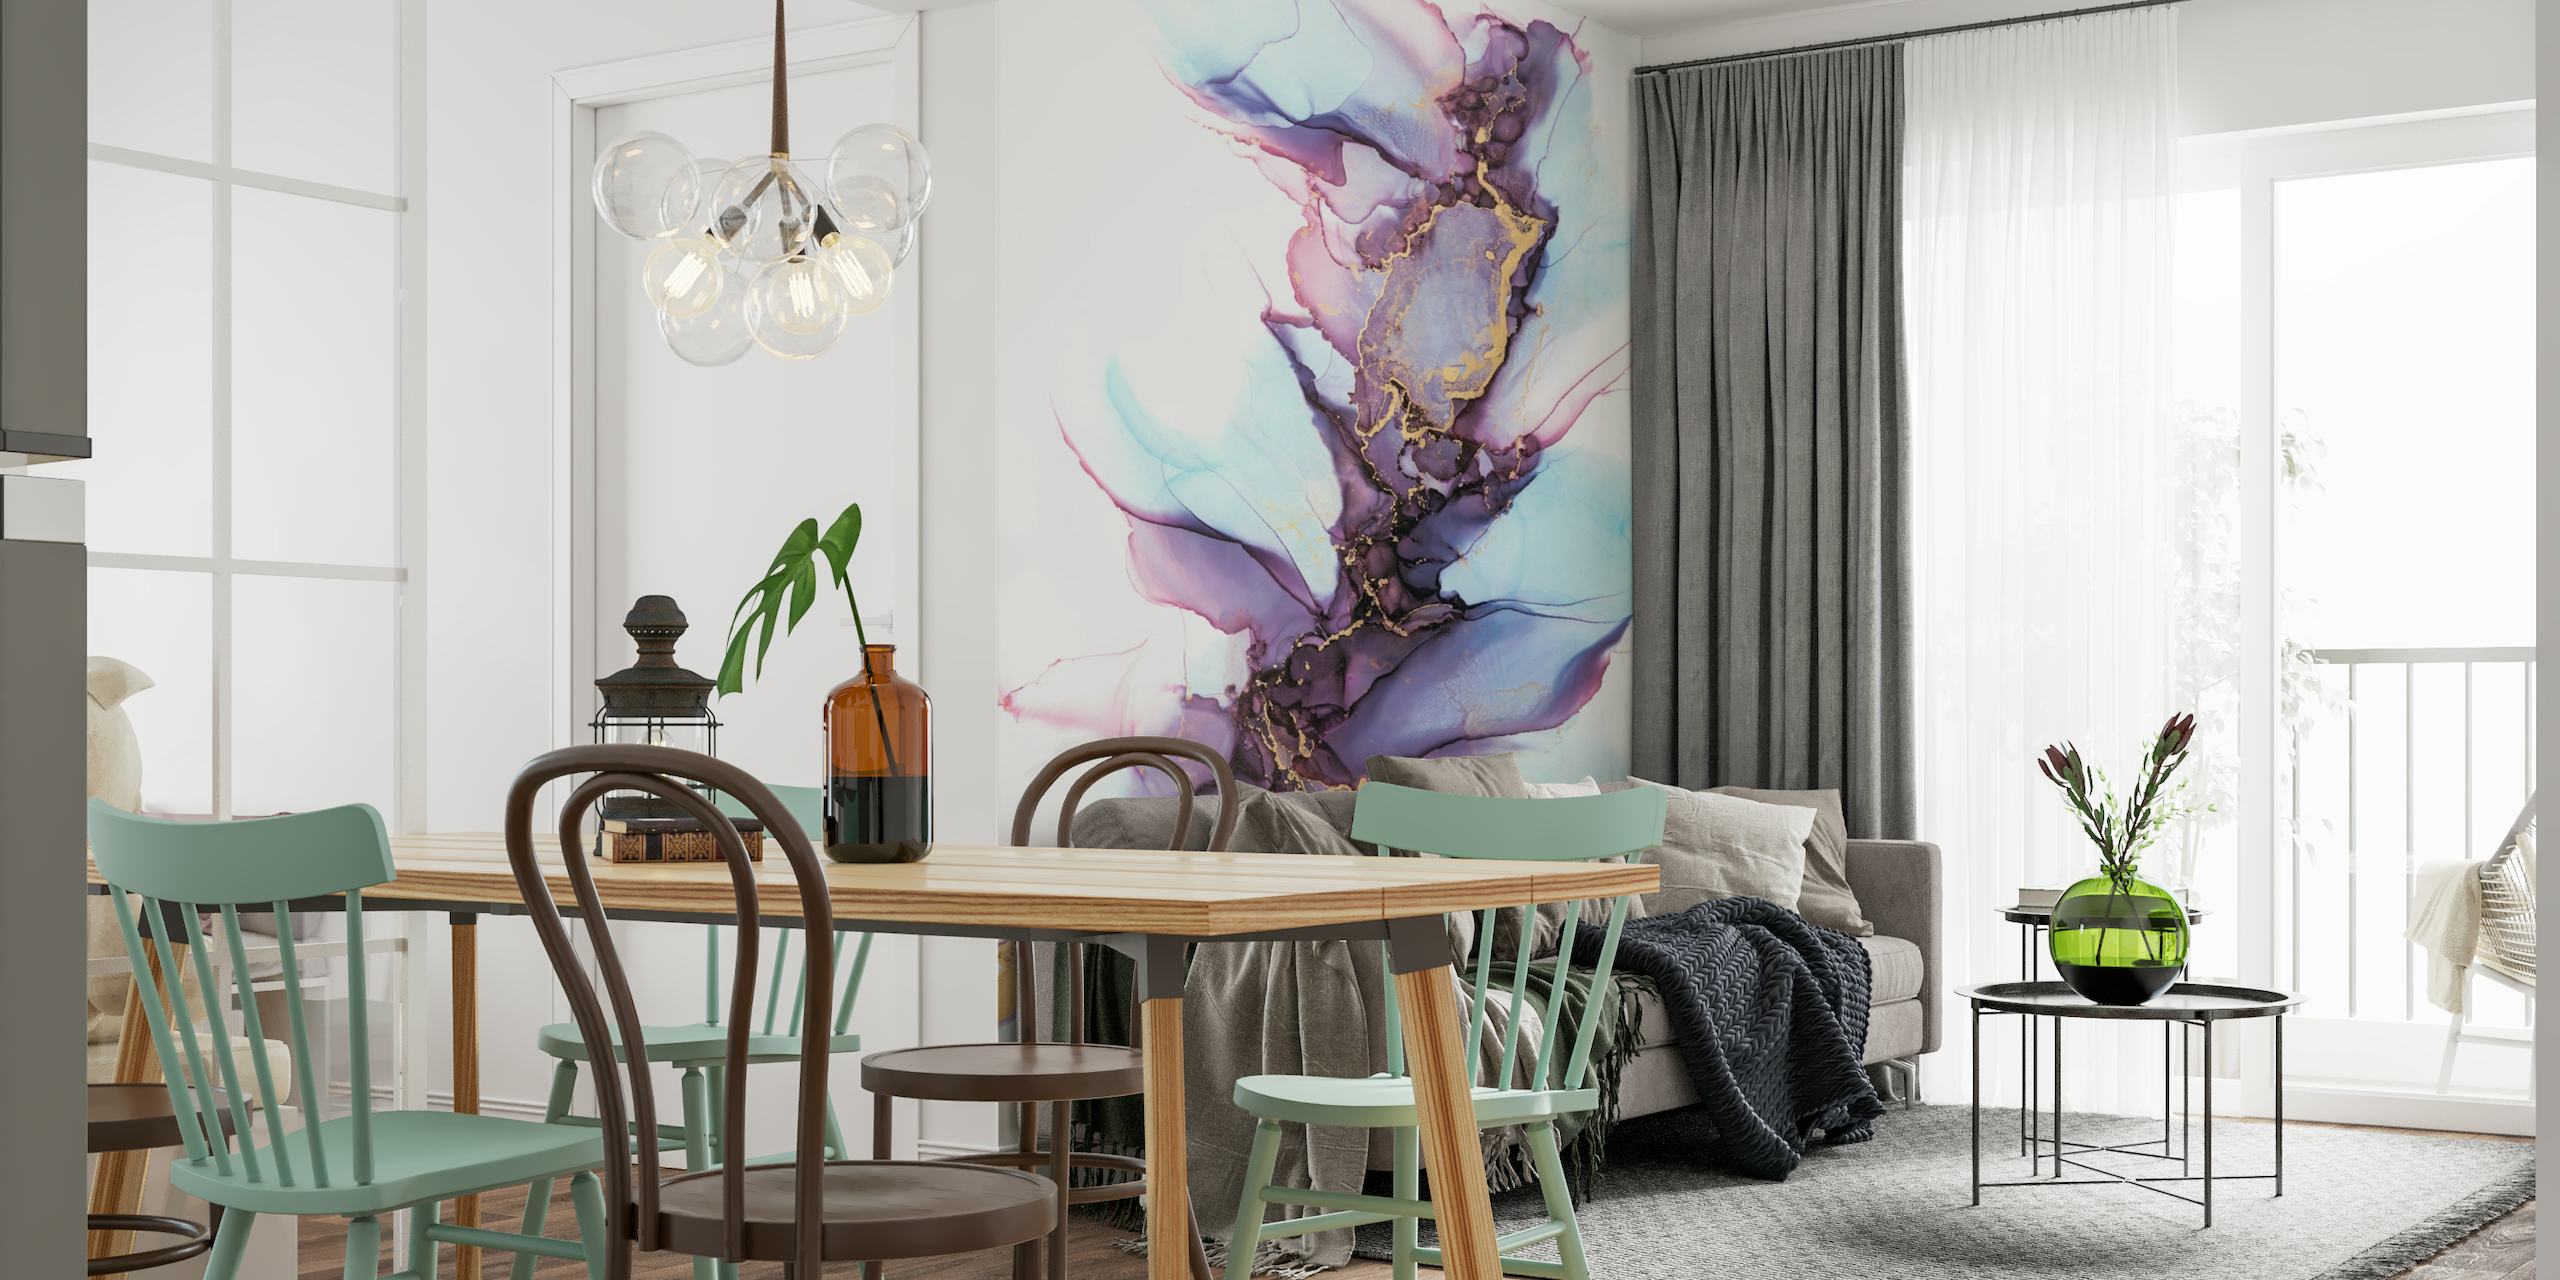 Abstract tri-color ink cloud wall mural with shades of purple, blue, and gold accents